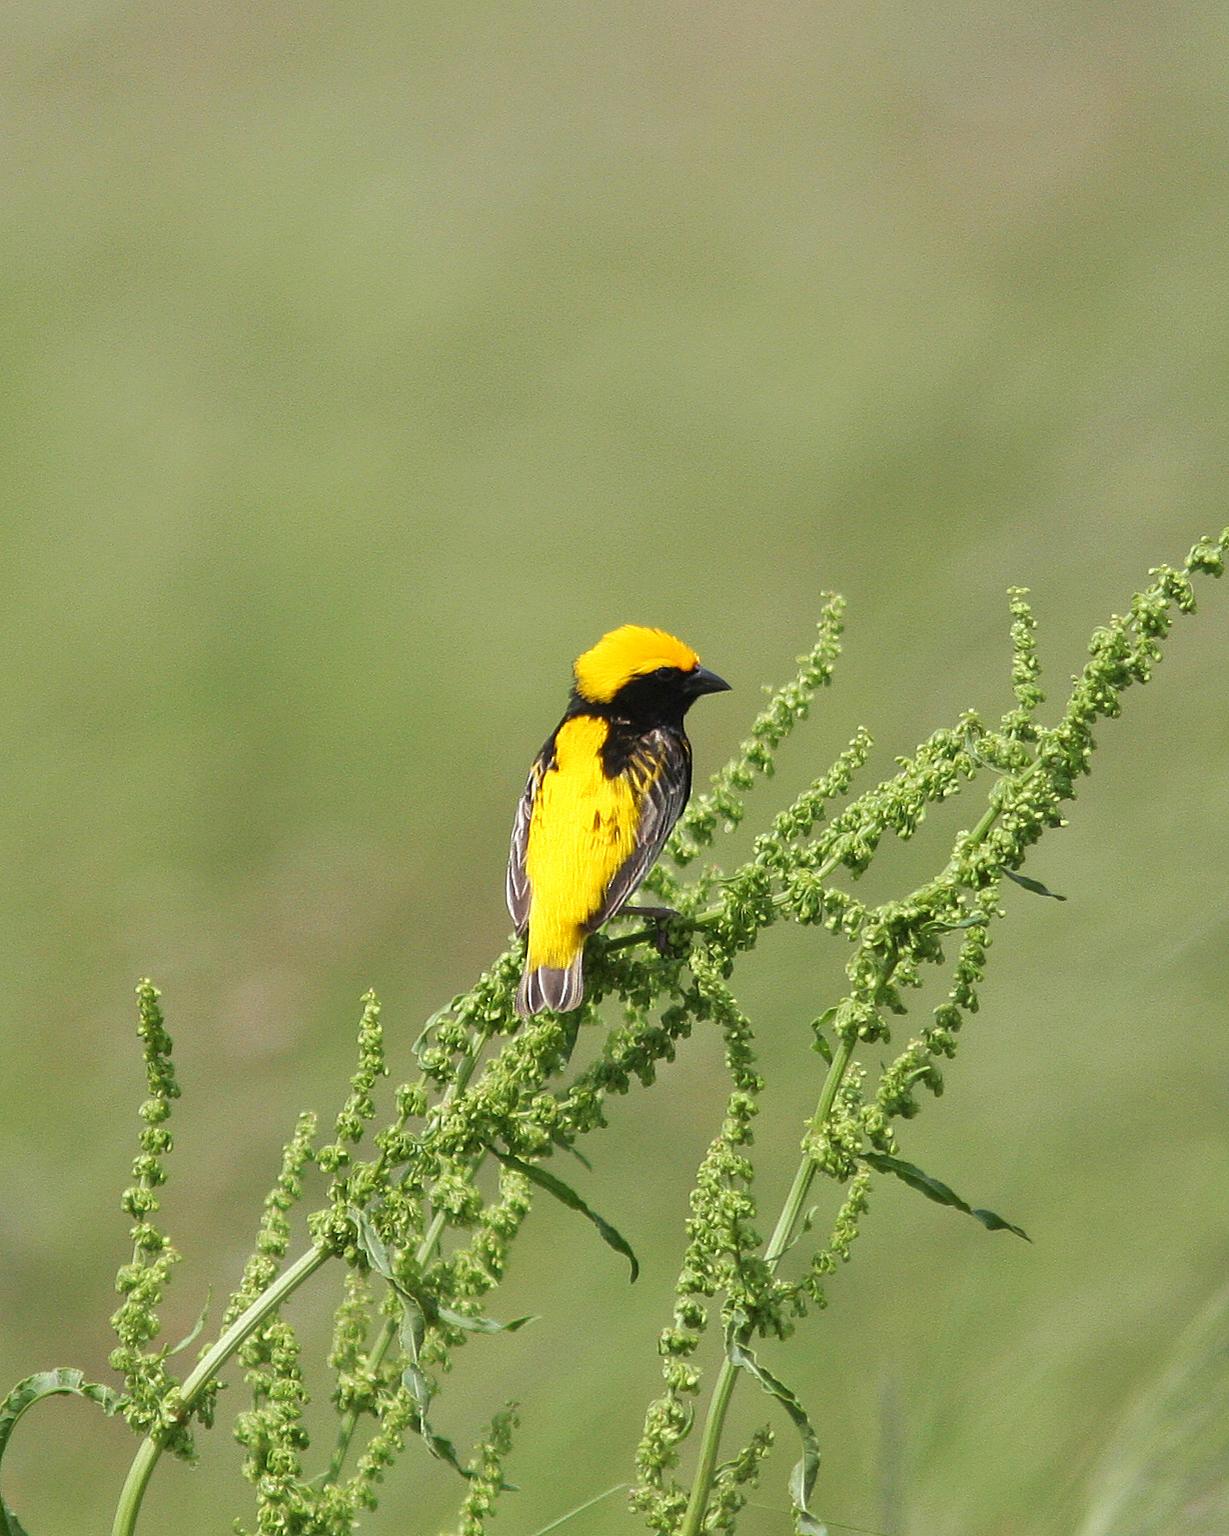 Yellow-crowned Bishop Photo by Henk Baptist